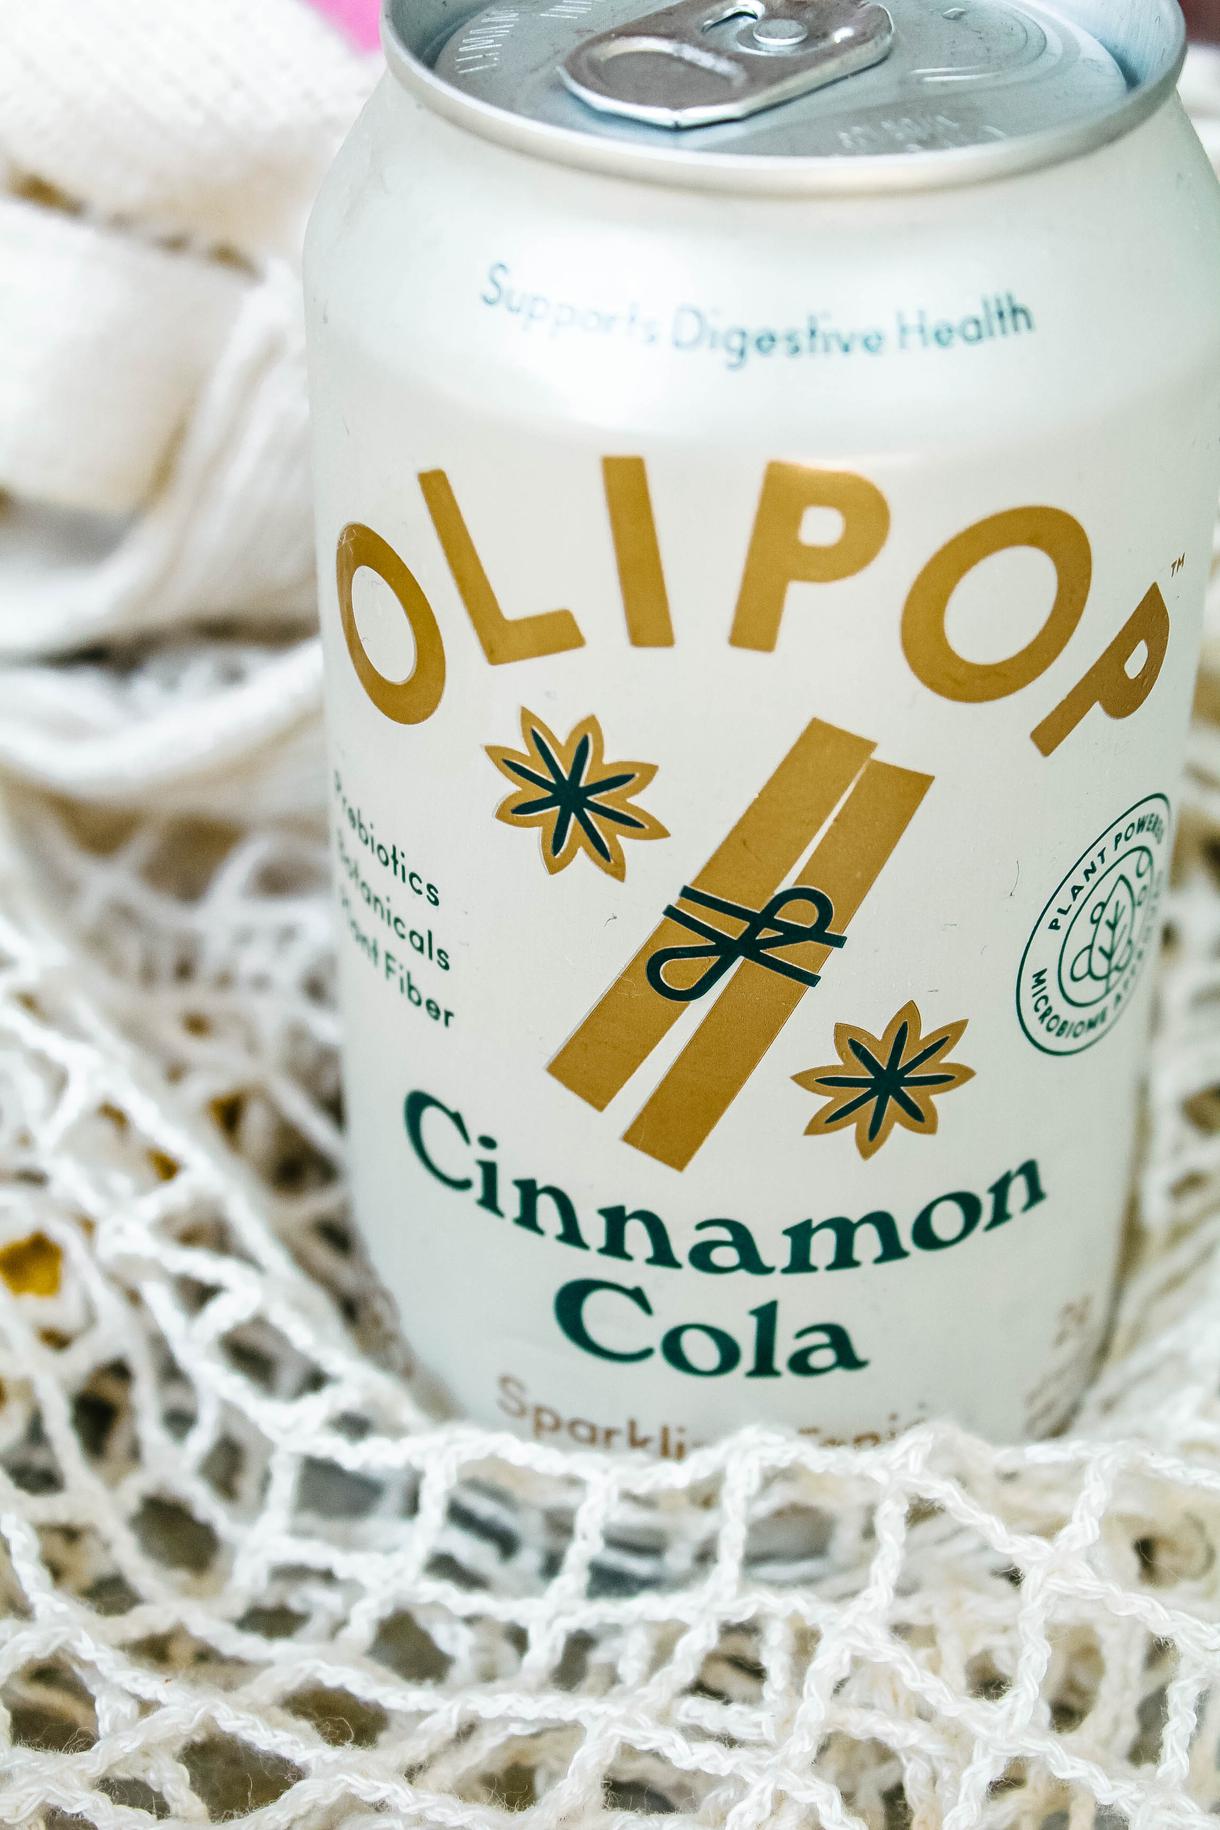 Can Pregnant Woman Drink Olipop: The Truth Revealed